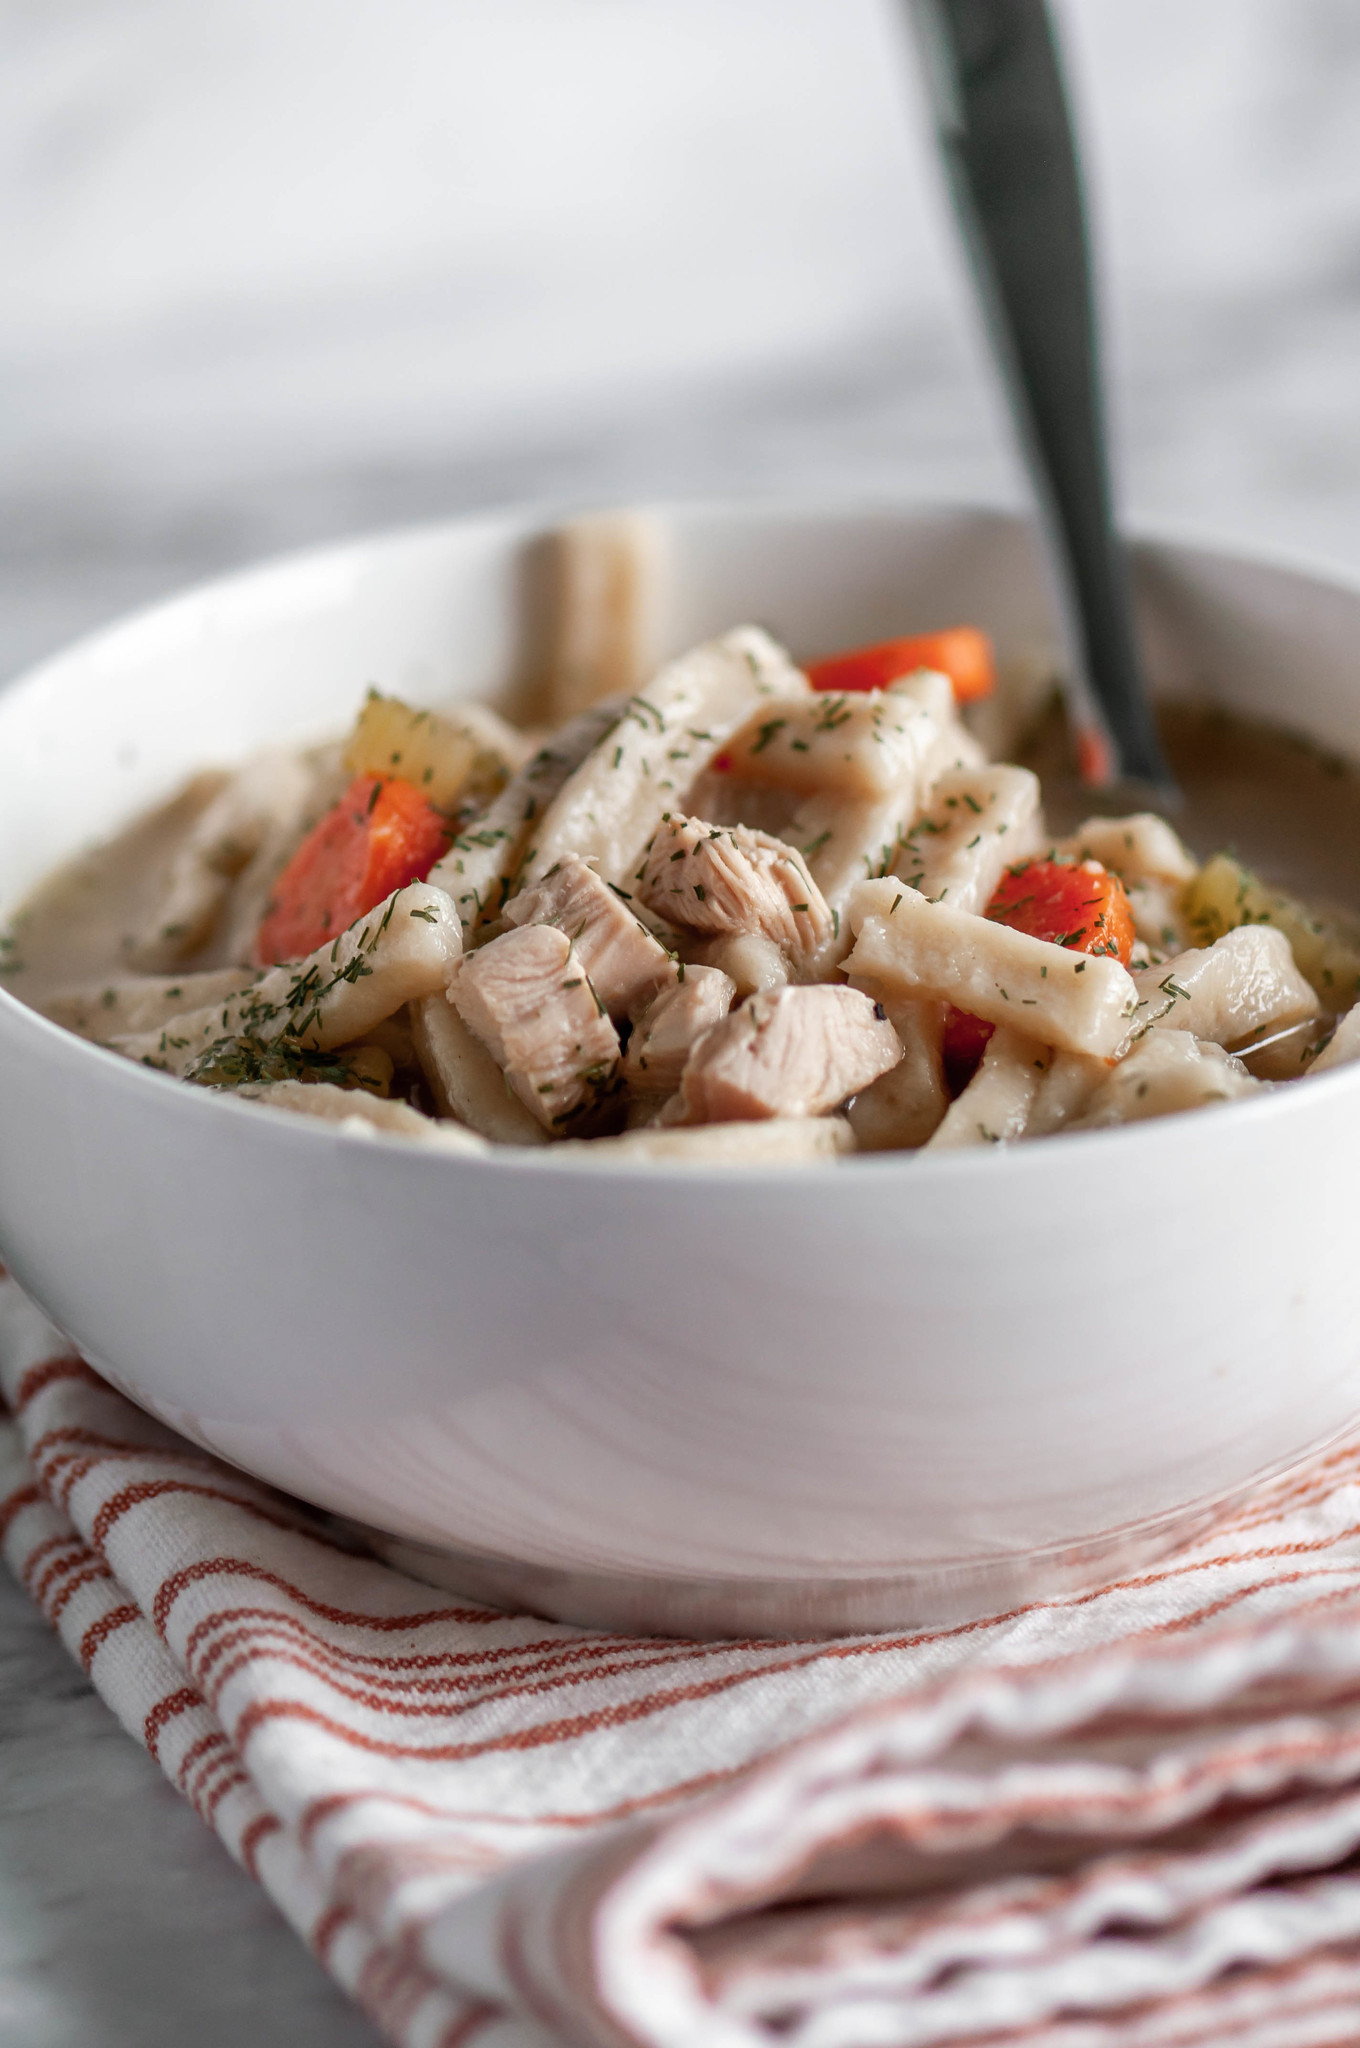 Instant Pot Turkey Noodle Soup uses your leftover turkey from Thanksgiving to make a hearty, flavorful soup in the Instant Pot.